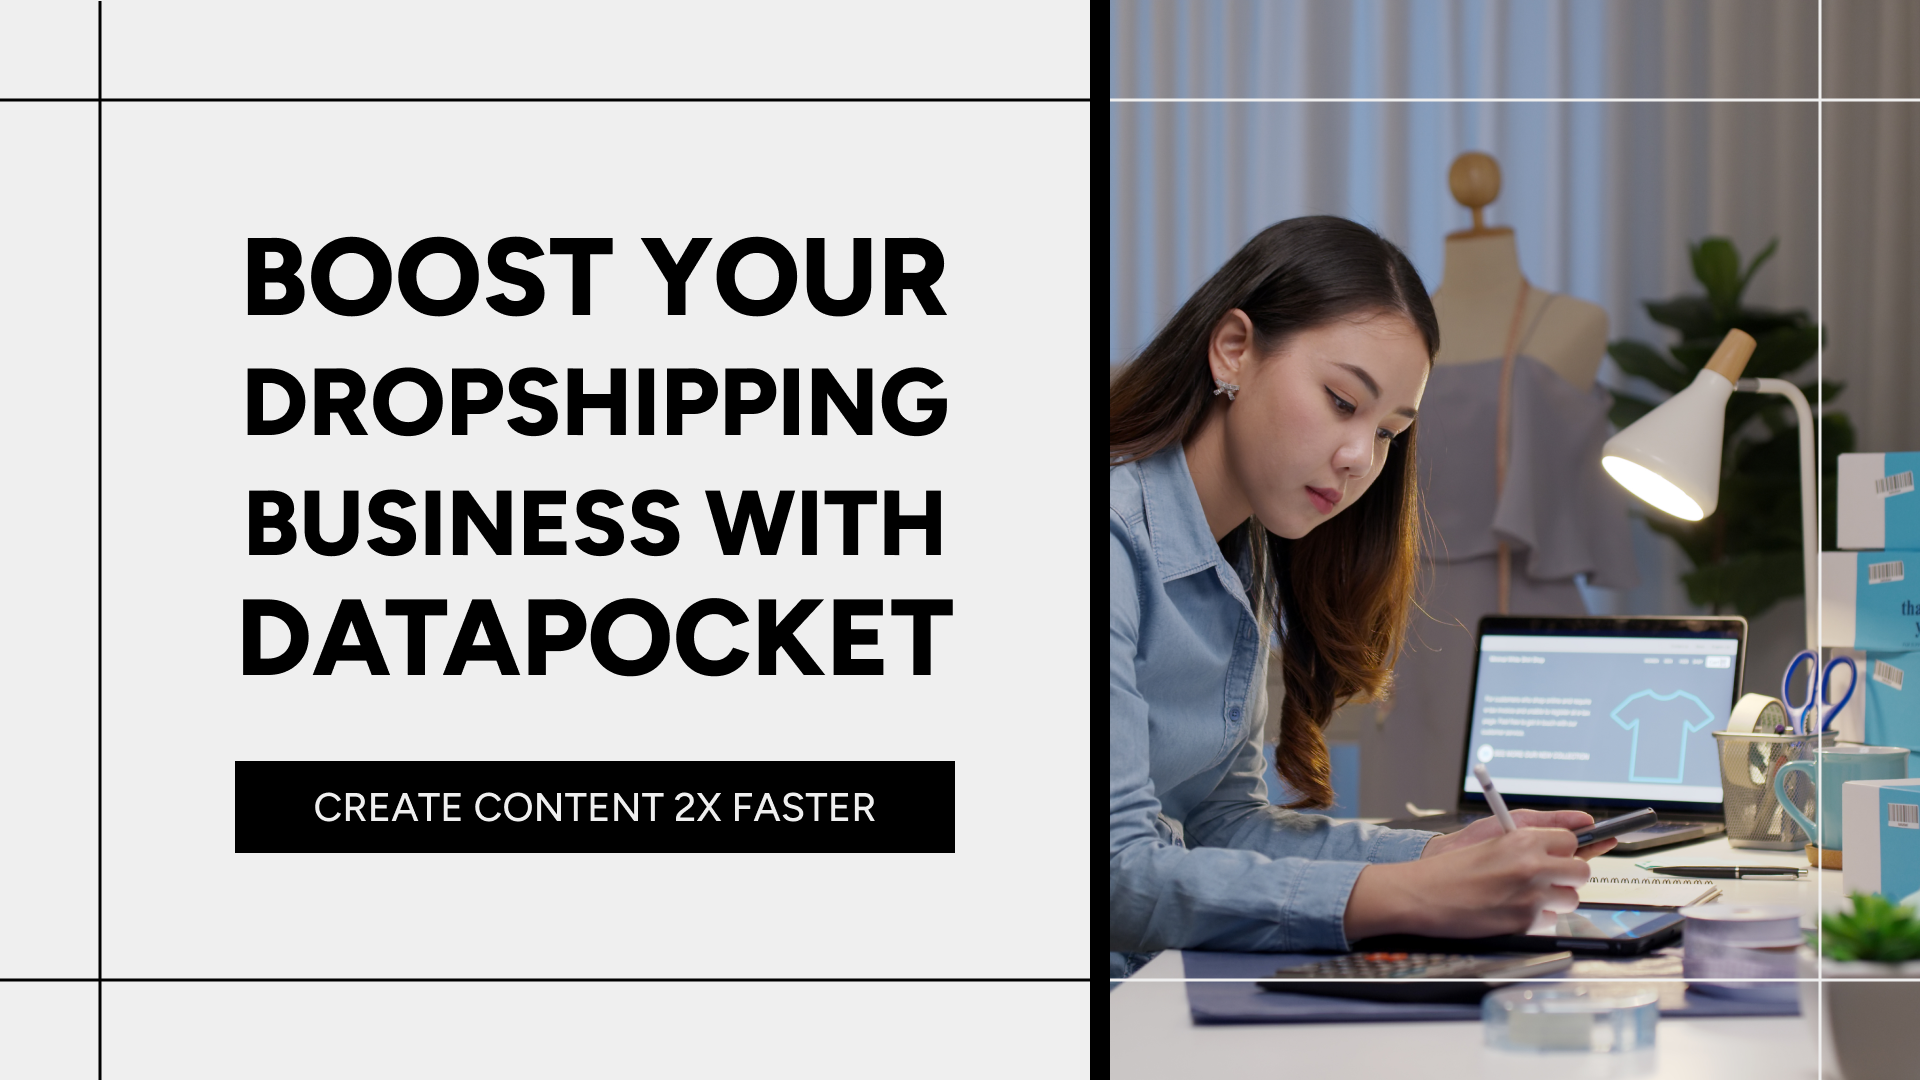 Boost your dropshipping business with DataPocket